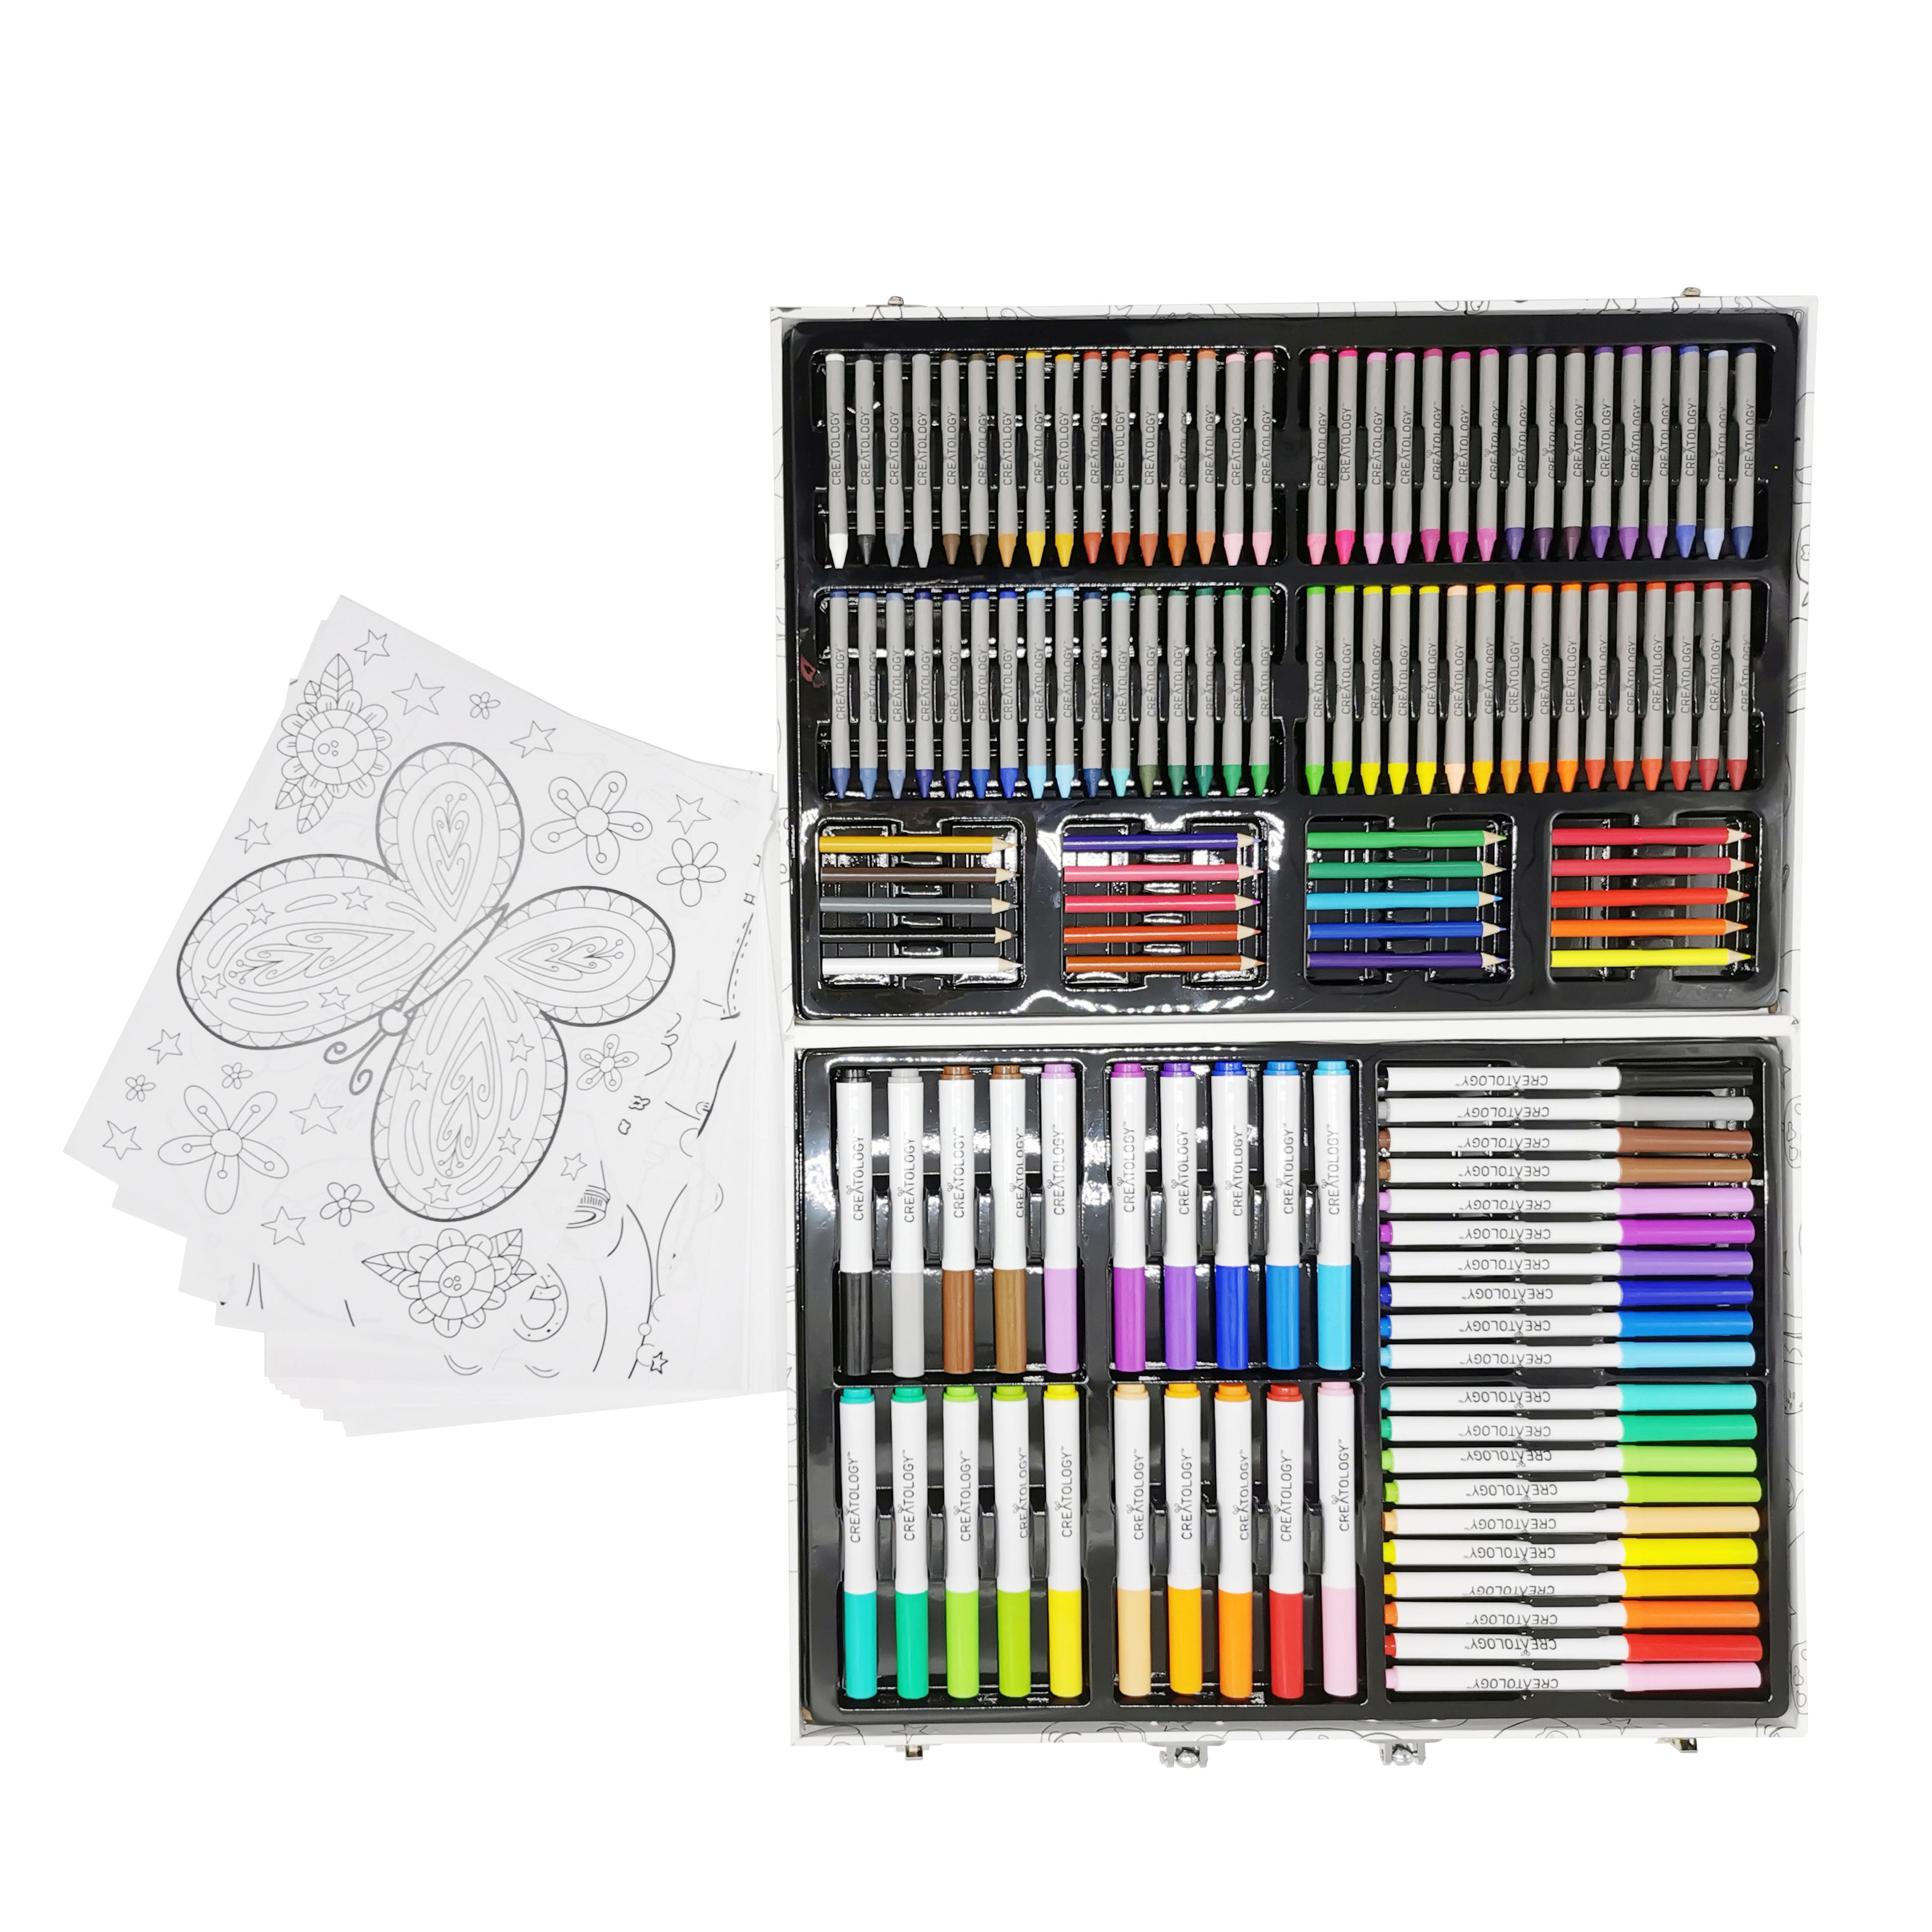 150PC CHILDRENS KIDS ART SET COLOURING DRAWING PAINTING MIXED COLOURS FOR  KIDS